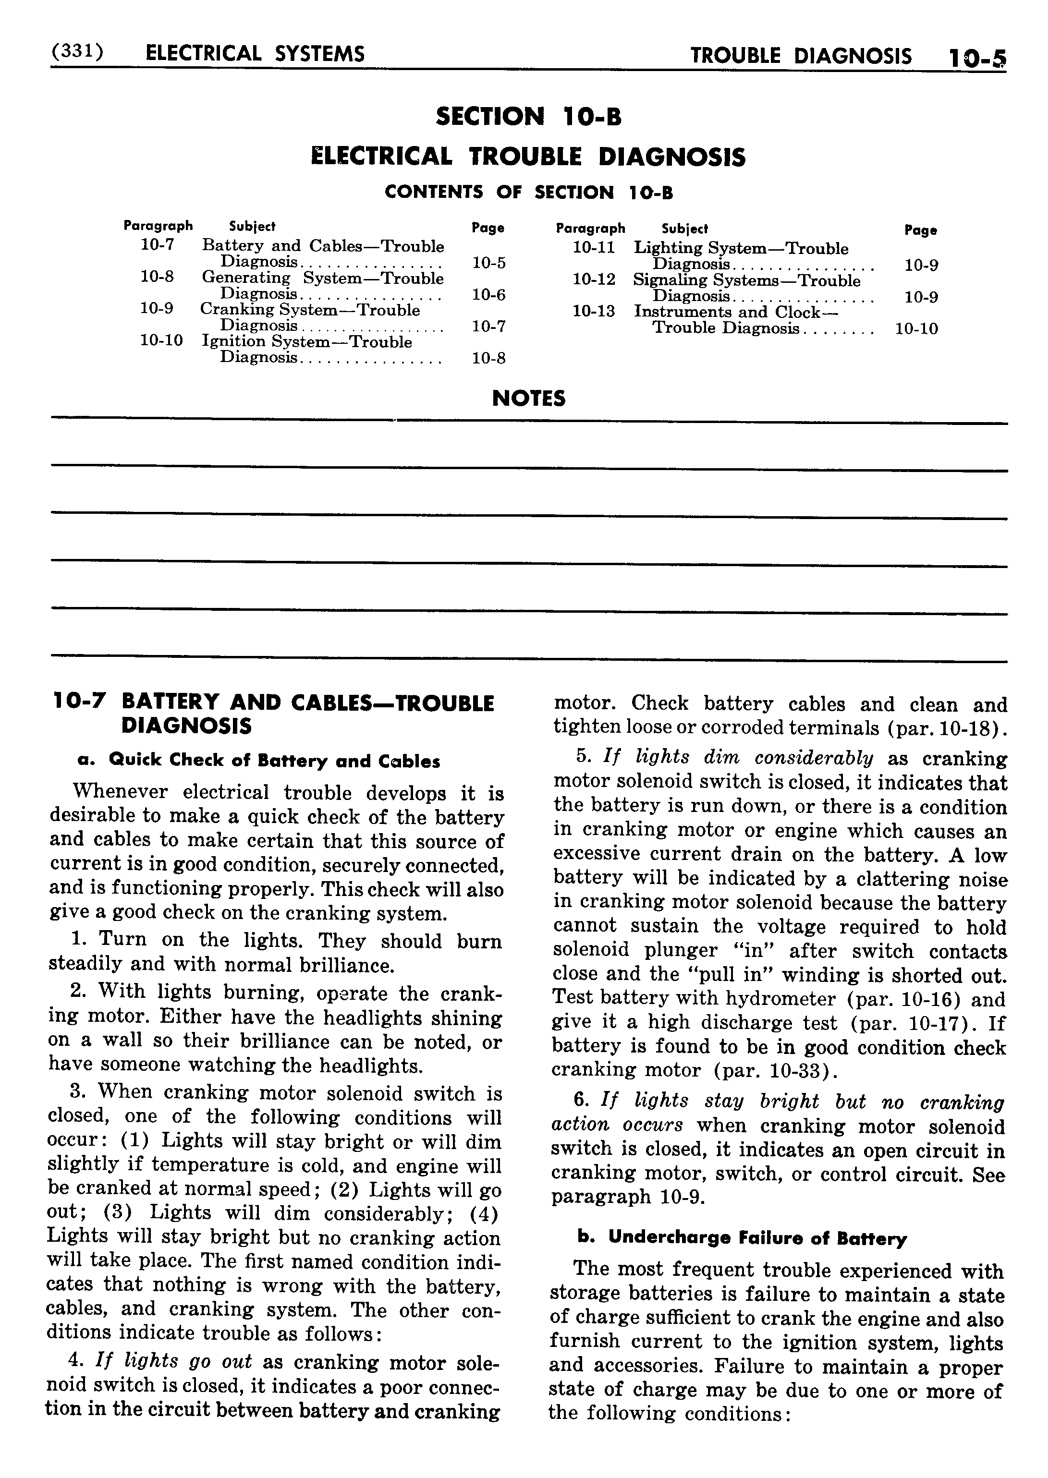 n_11 1956 Buick Shop Manual - Electrical Systems-005-005.jpg